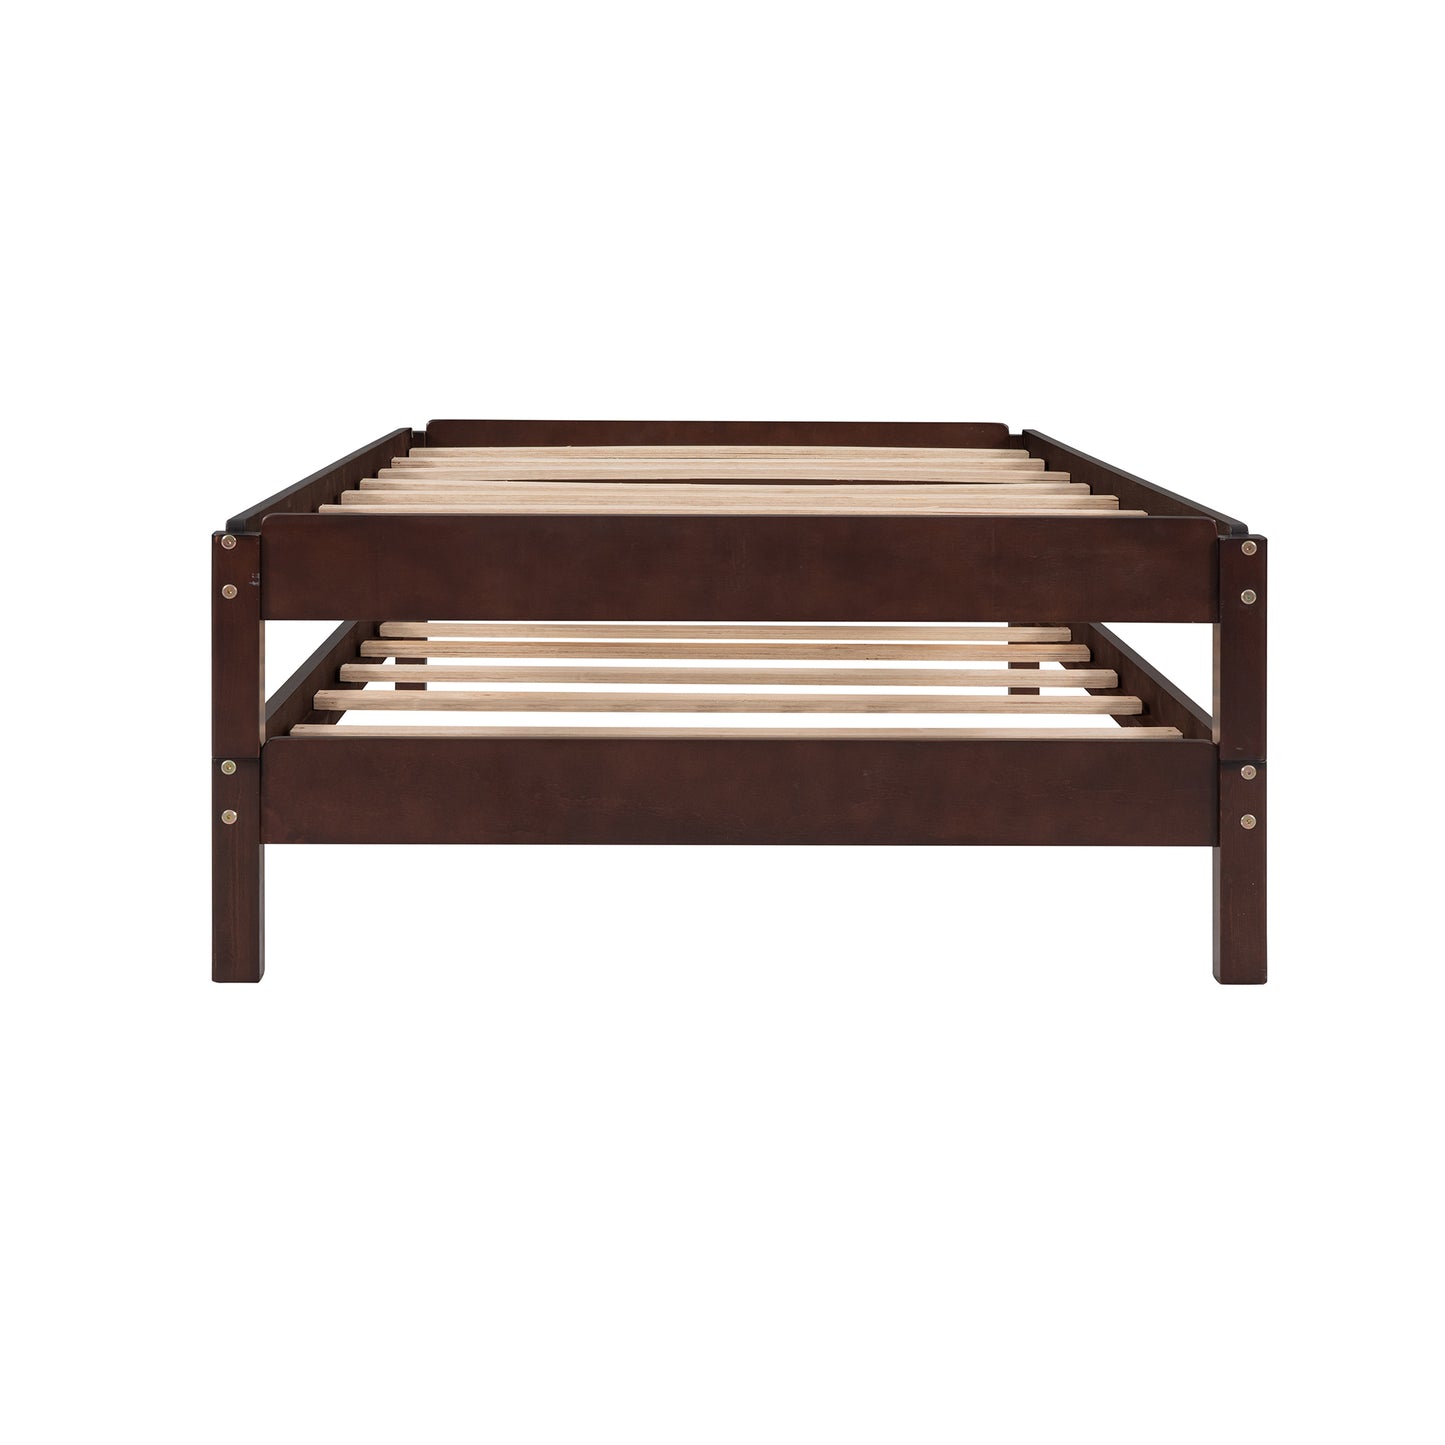 Solid Platform Bed Twin Size, 2 Twin Wood Bed Guest Bed Stackable Bed Walnut